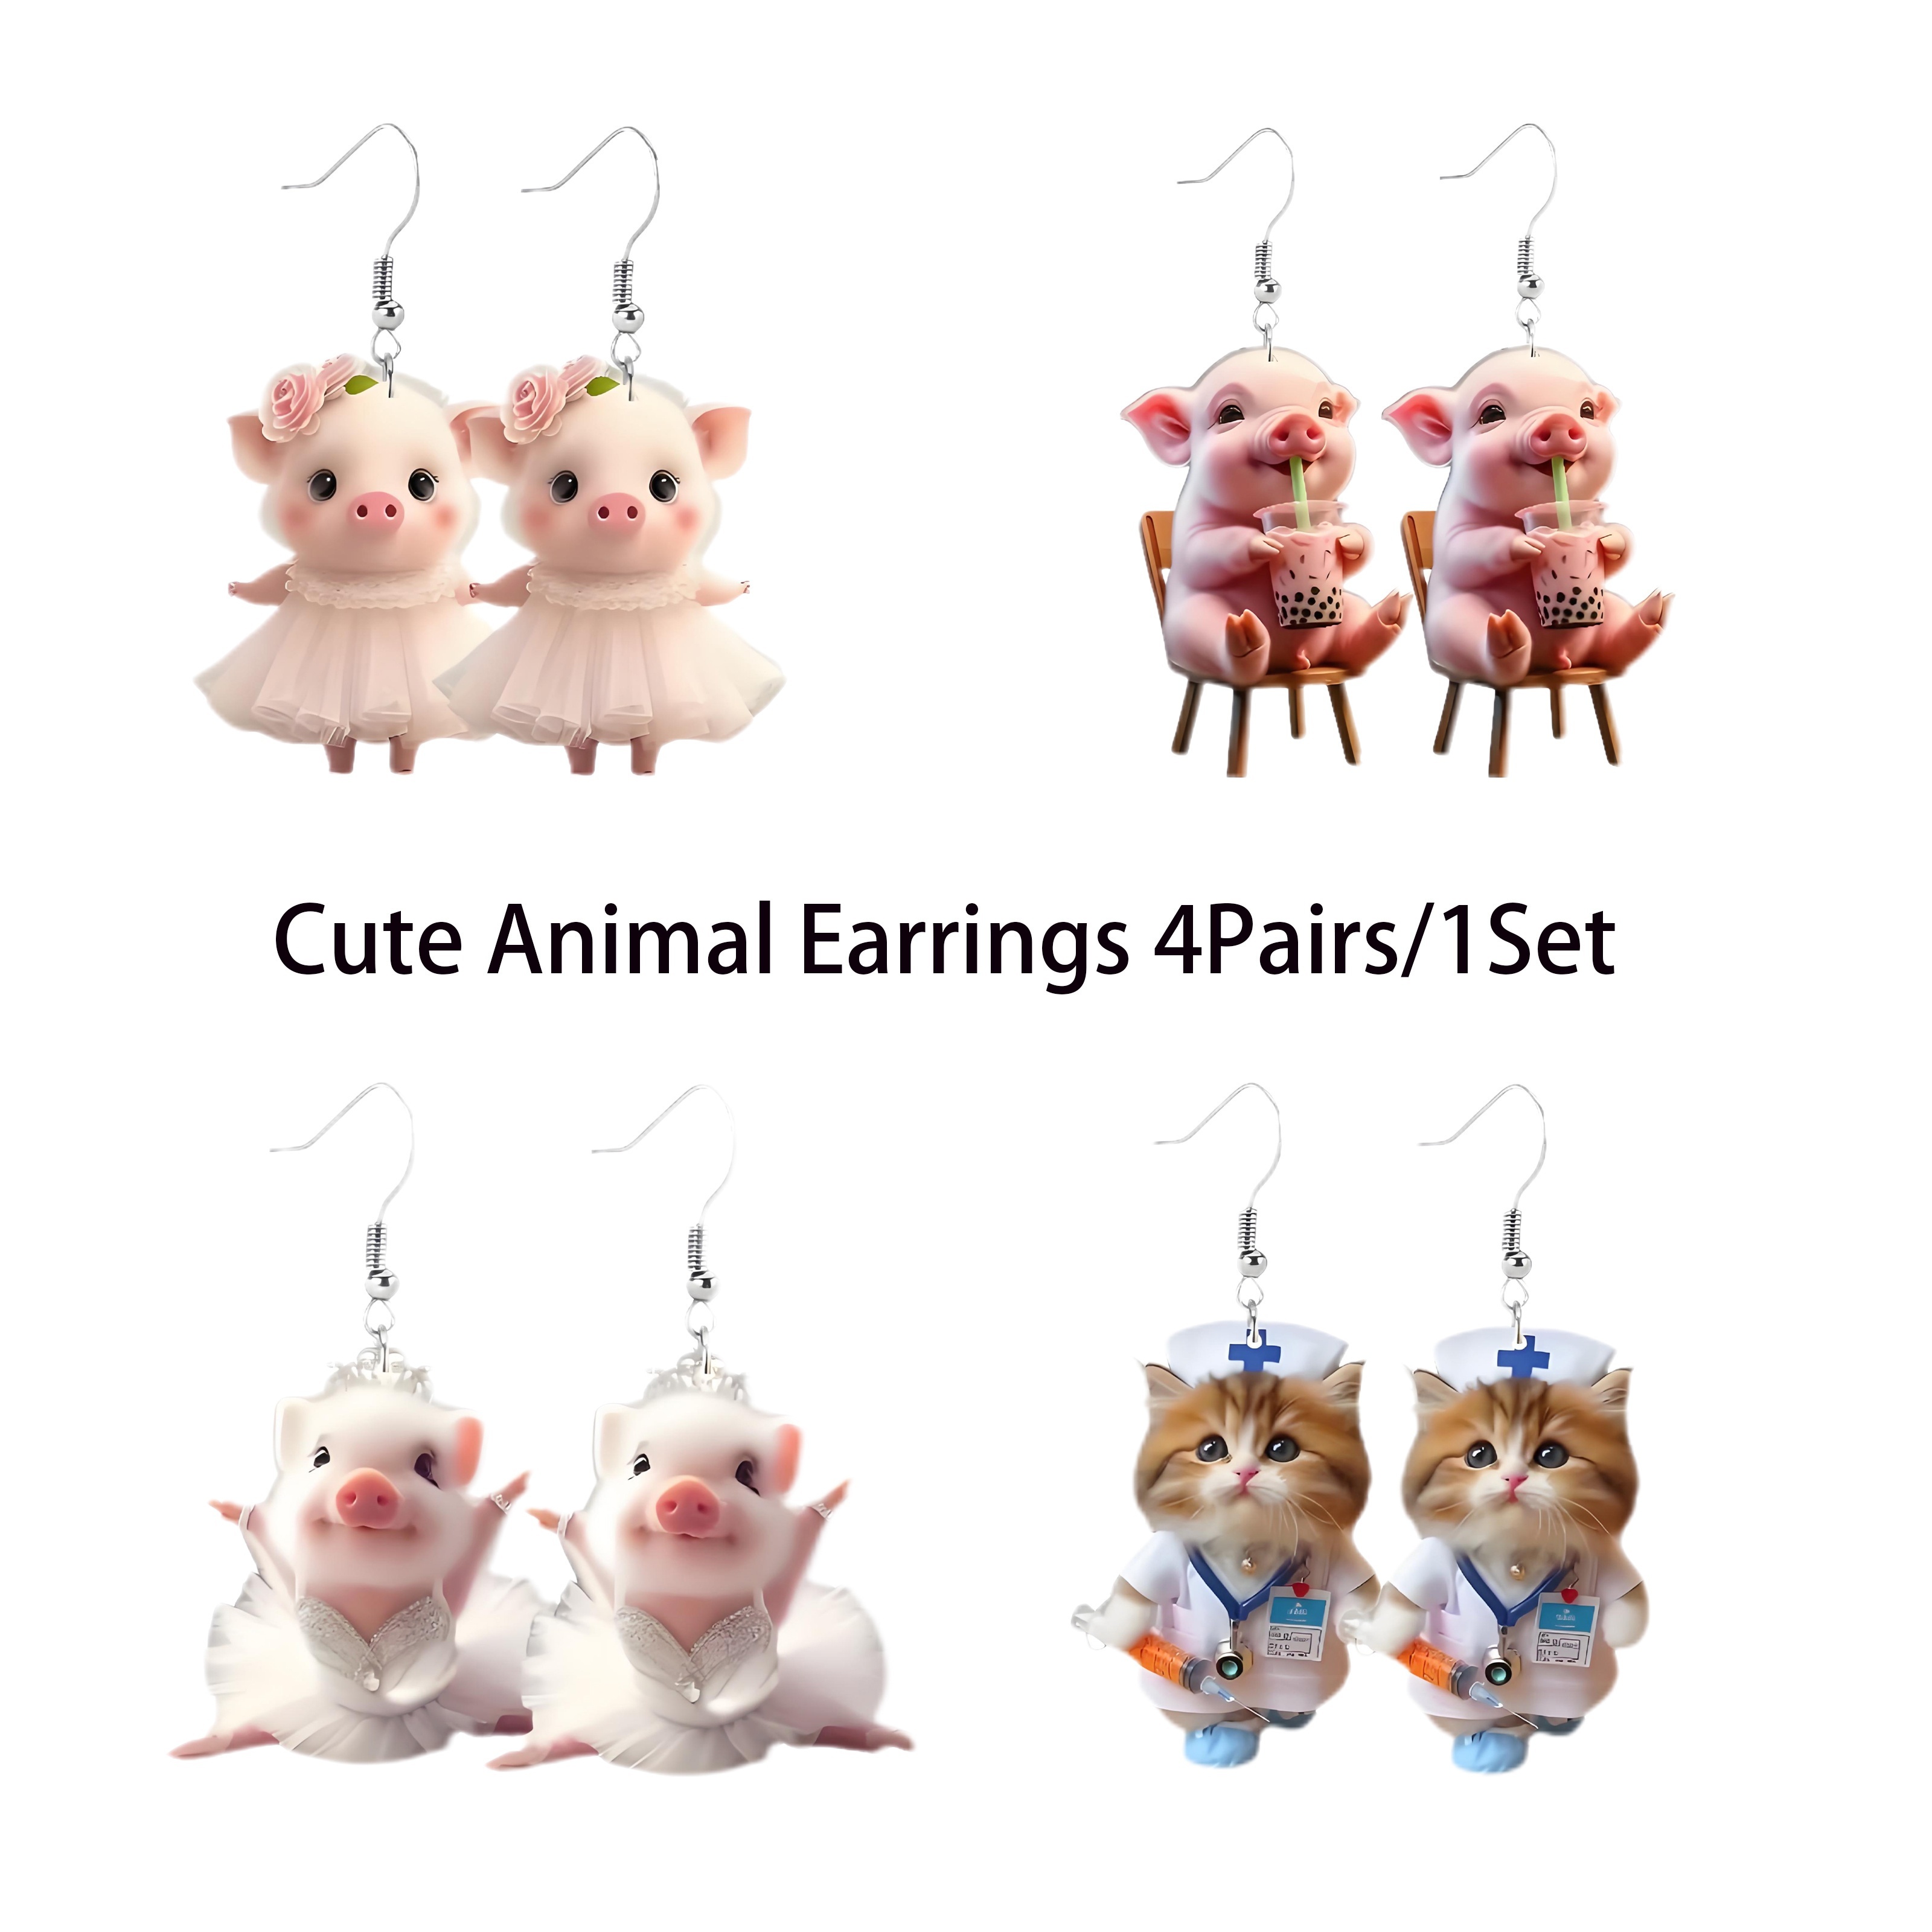 

8pcs Adorable Piggy And Cat Acrylic Drop Earrings Set - Hanging Holiday Home Decor, Fashion Accessories, Unique Surprise Gifts For Girls, No Feathers, Electricity-free Use